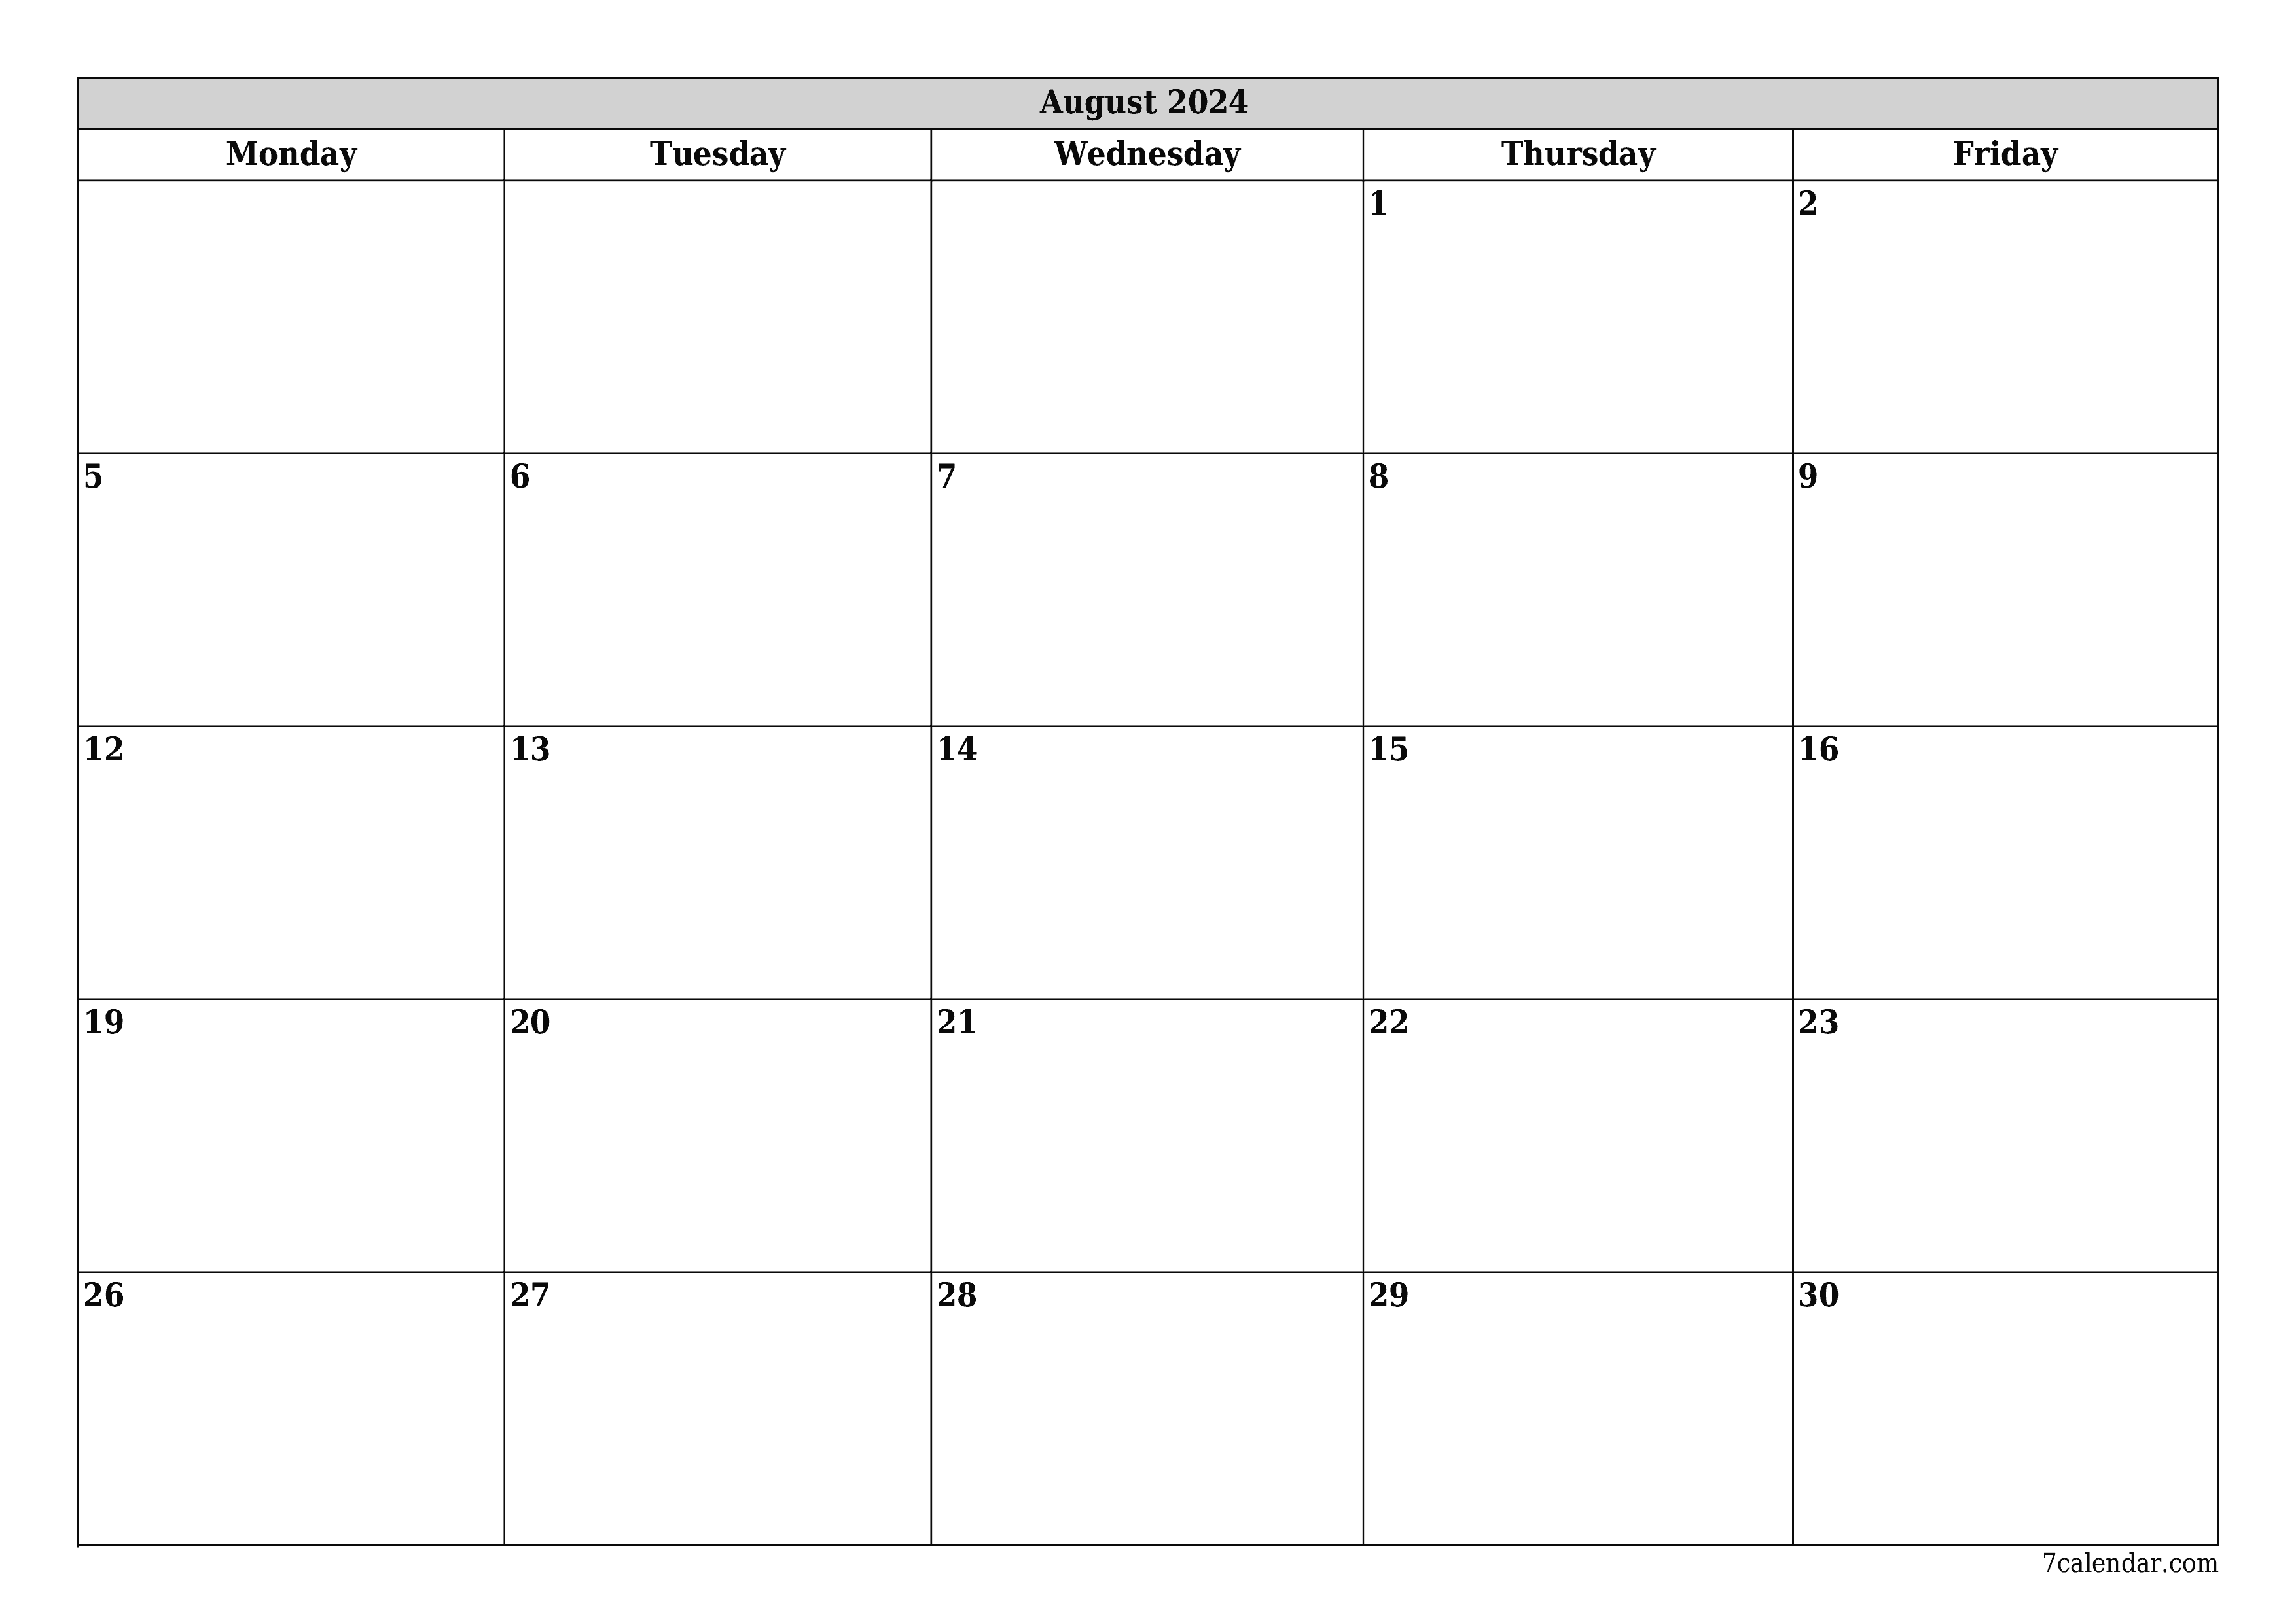 printable wall template free horizontal Monthly planner calendar August (Aug) 2024